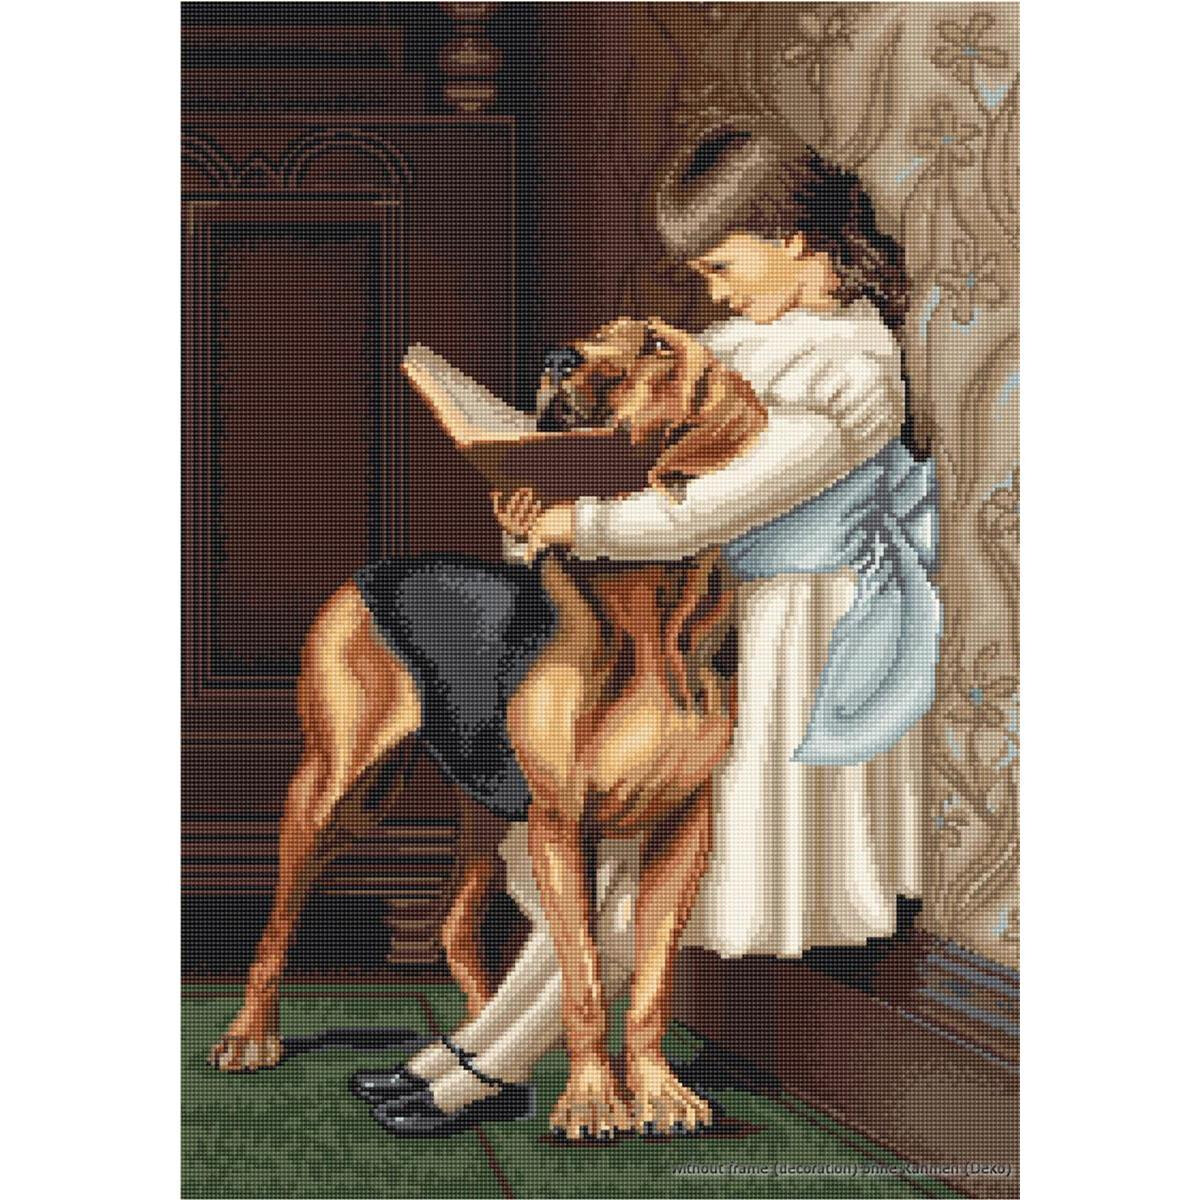 Luca-S counted Cross Stitch kit "Hour of...